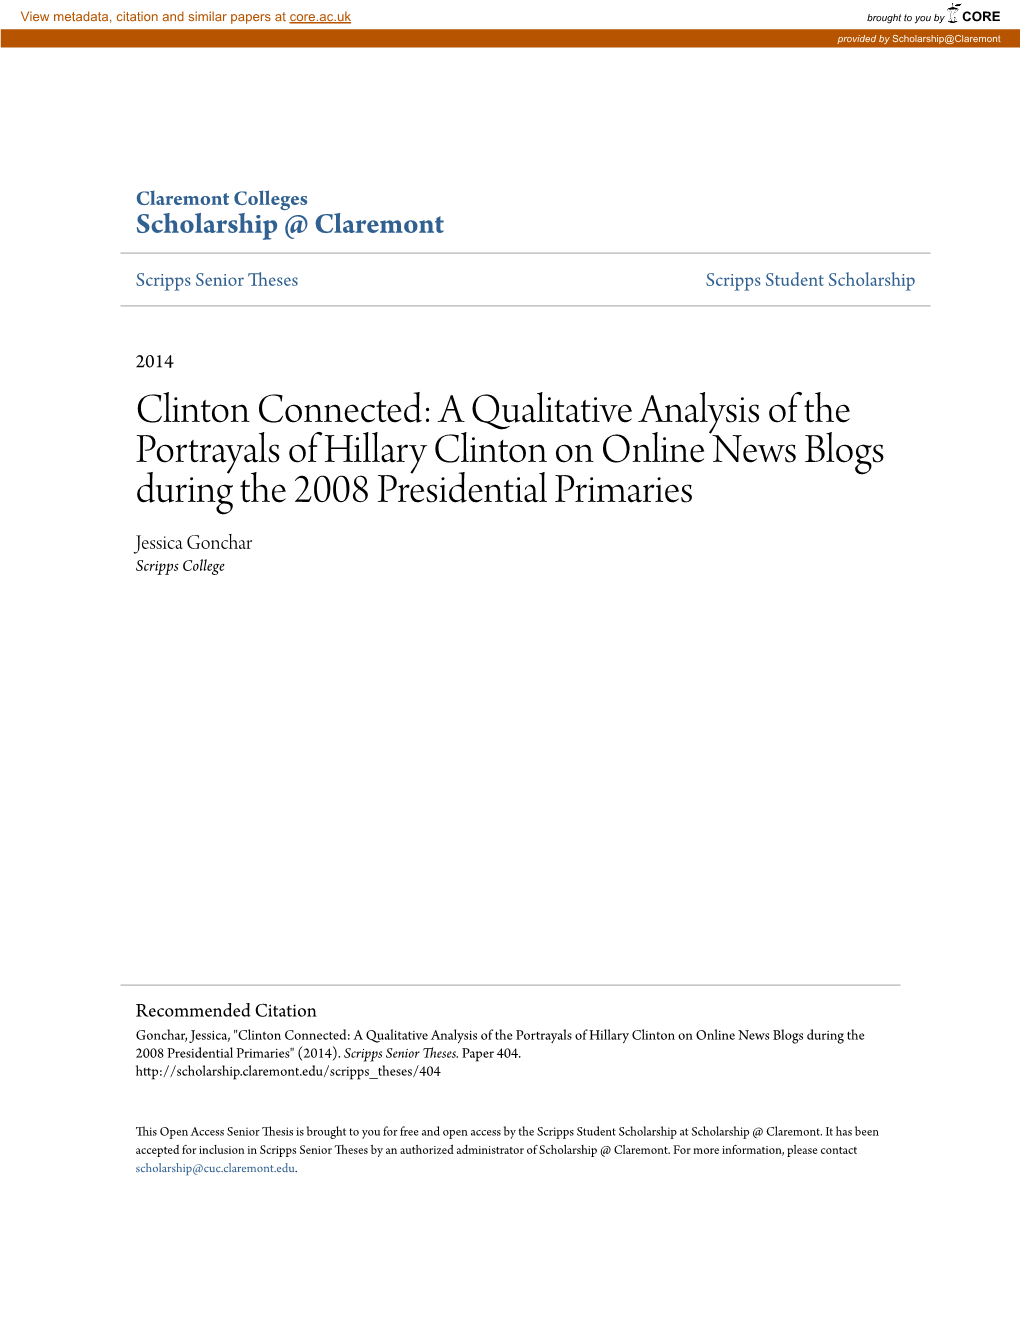 A Qualitative Analysis of the Portrayals of Hillary Clinton on Online News Blogs During the 2008 Presidential Primaries Jessica Gonchar Scripps College